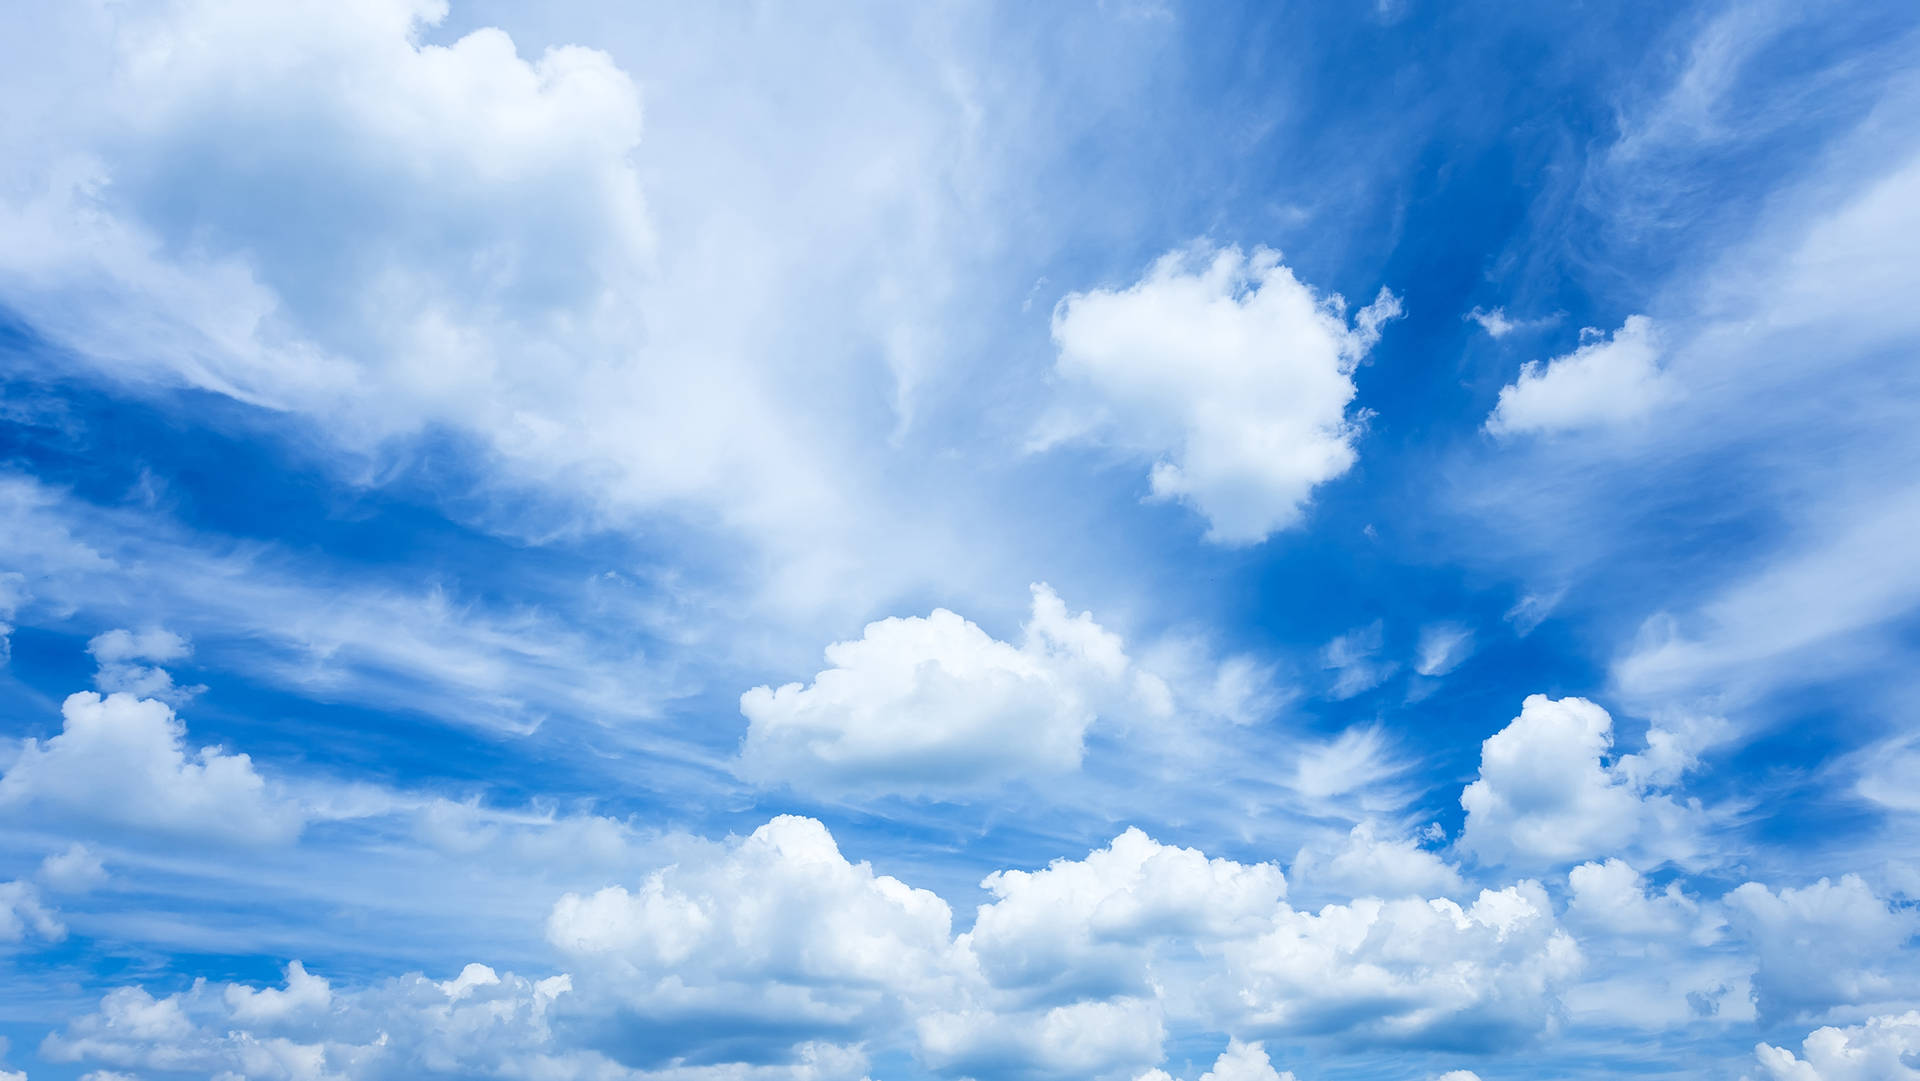 Calm Funeral Clouds Background